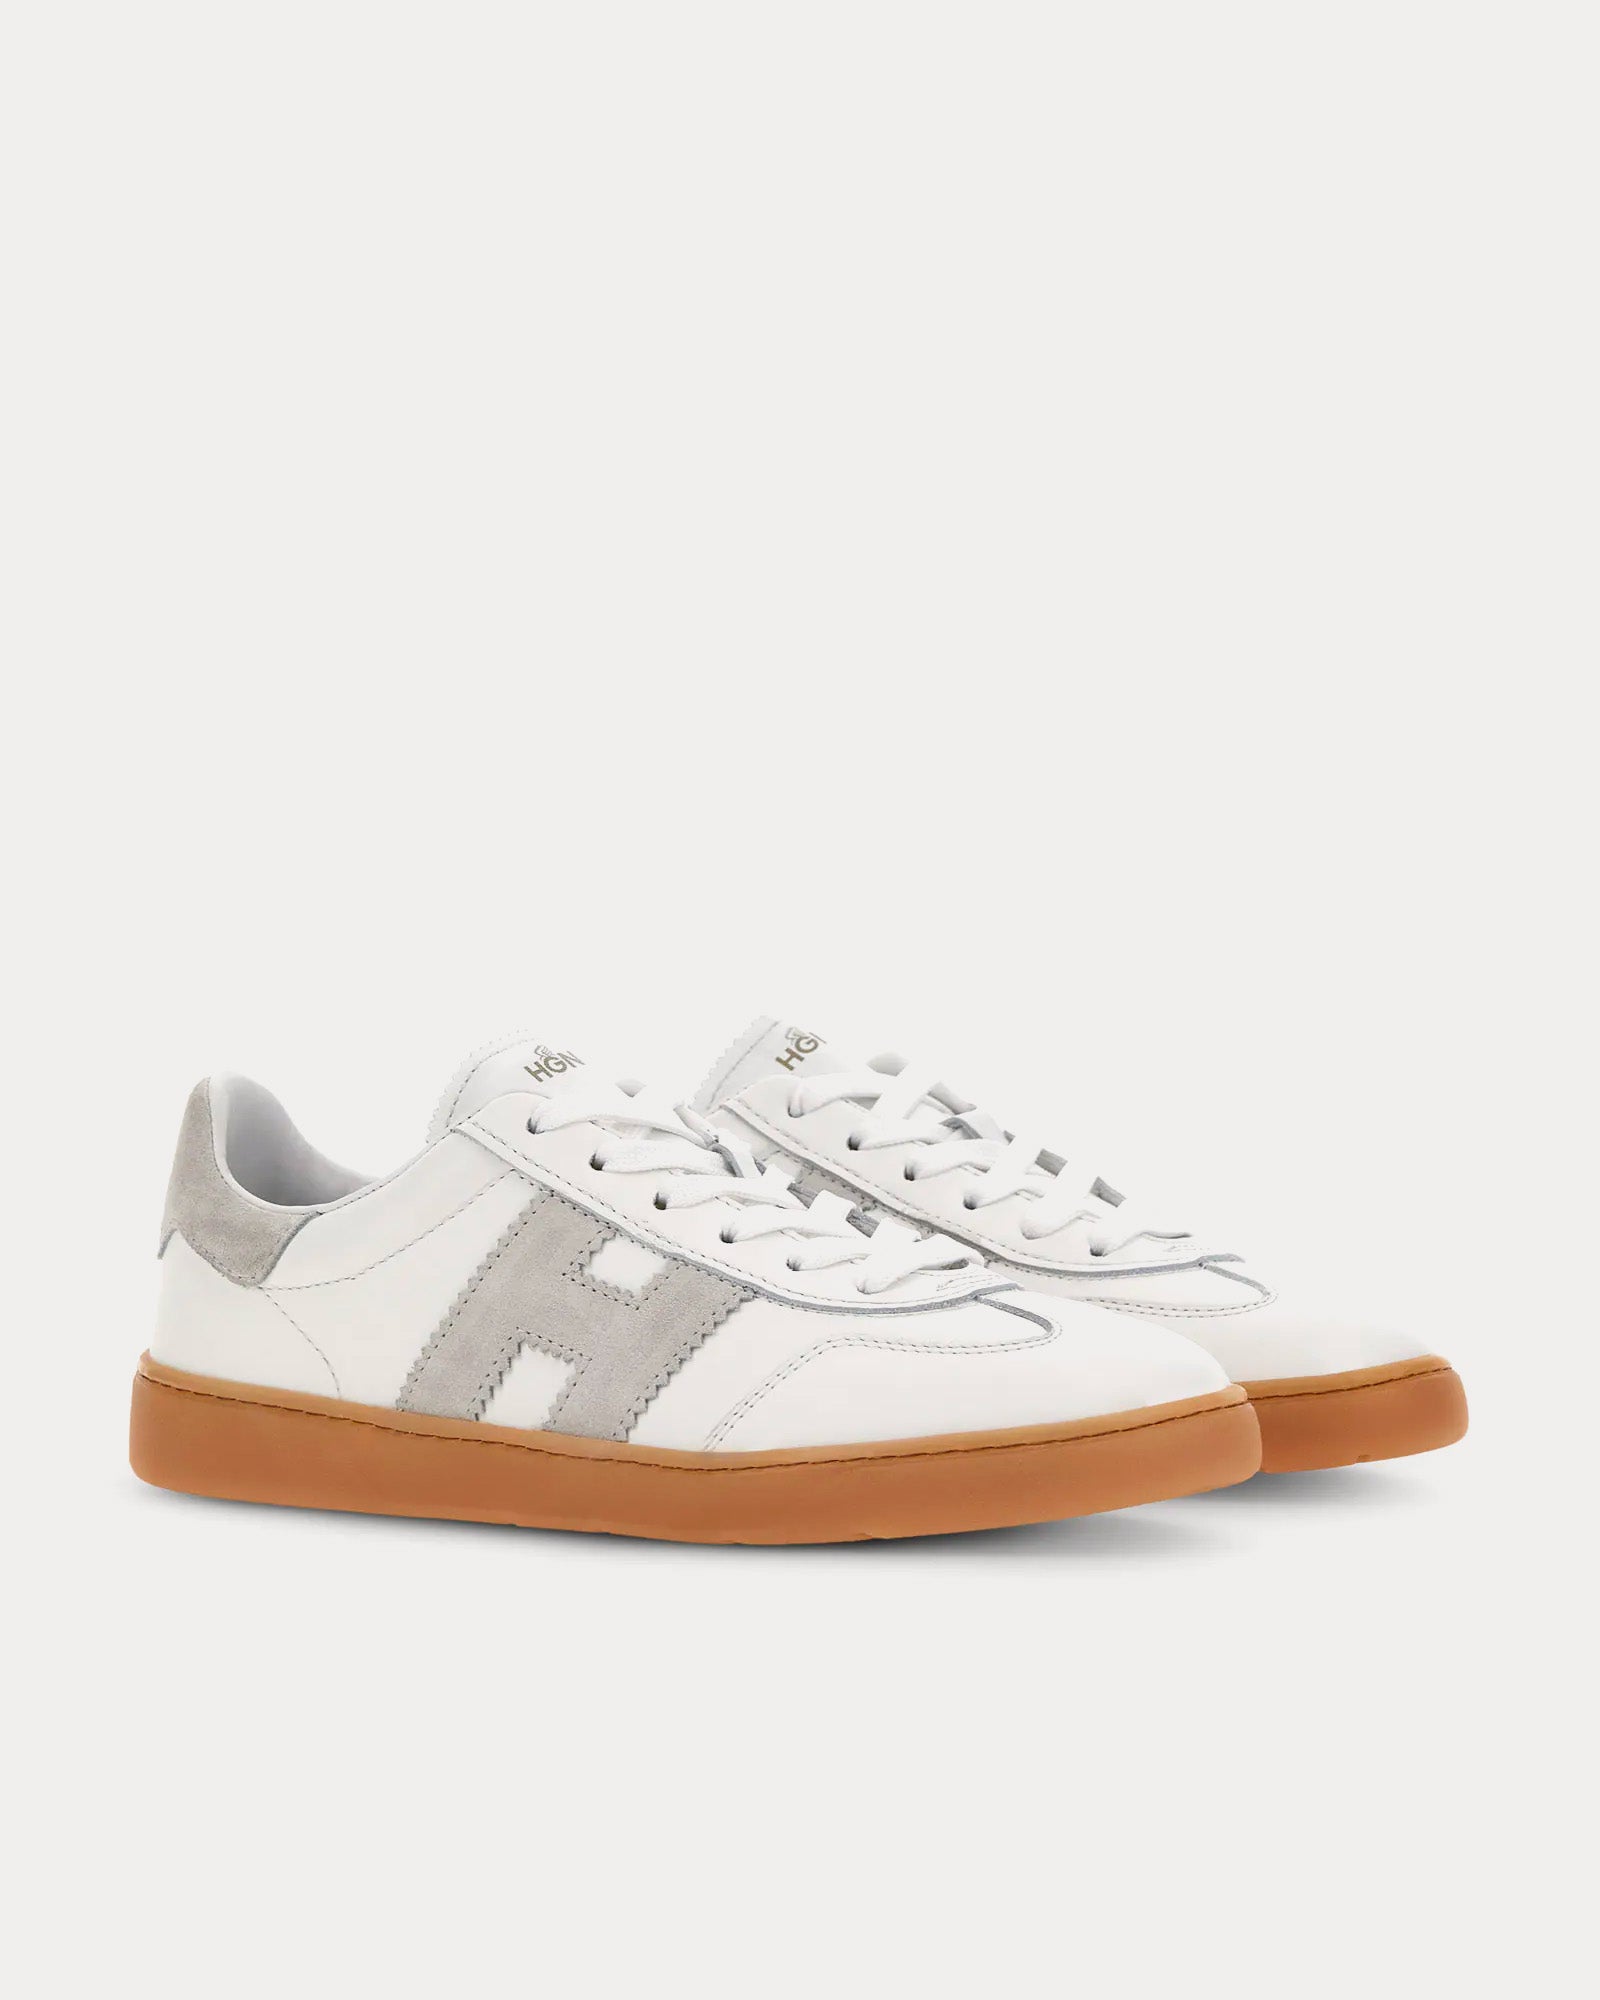 Hogan - Cool Leather White Low Top Sneakers